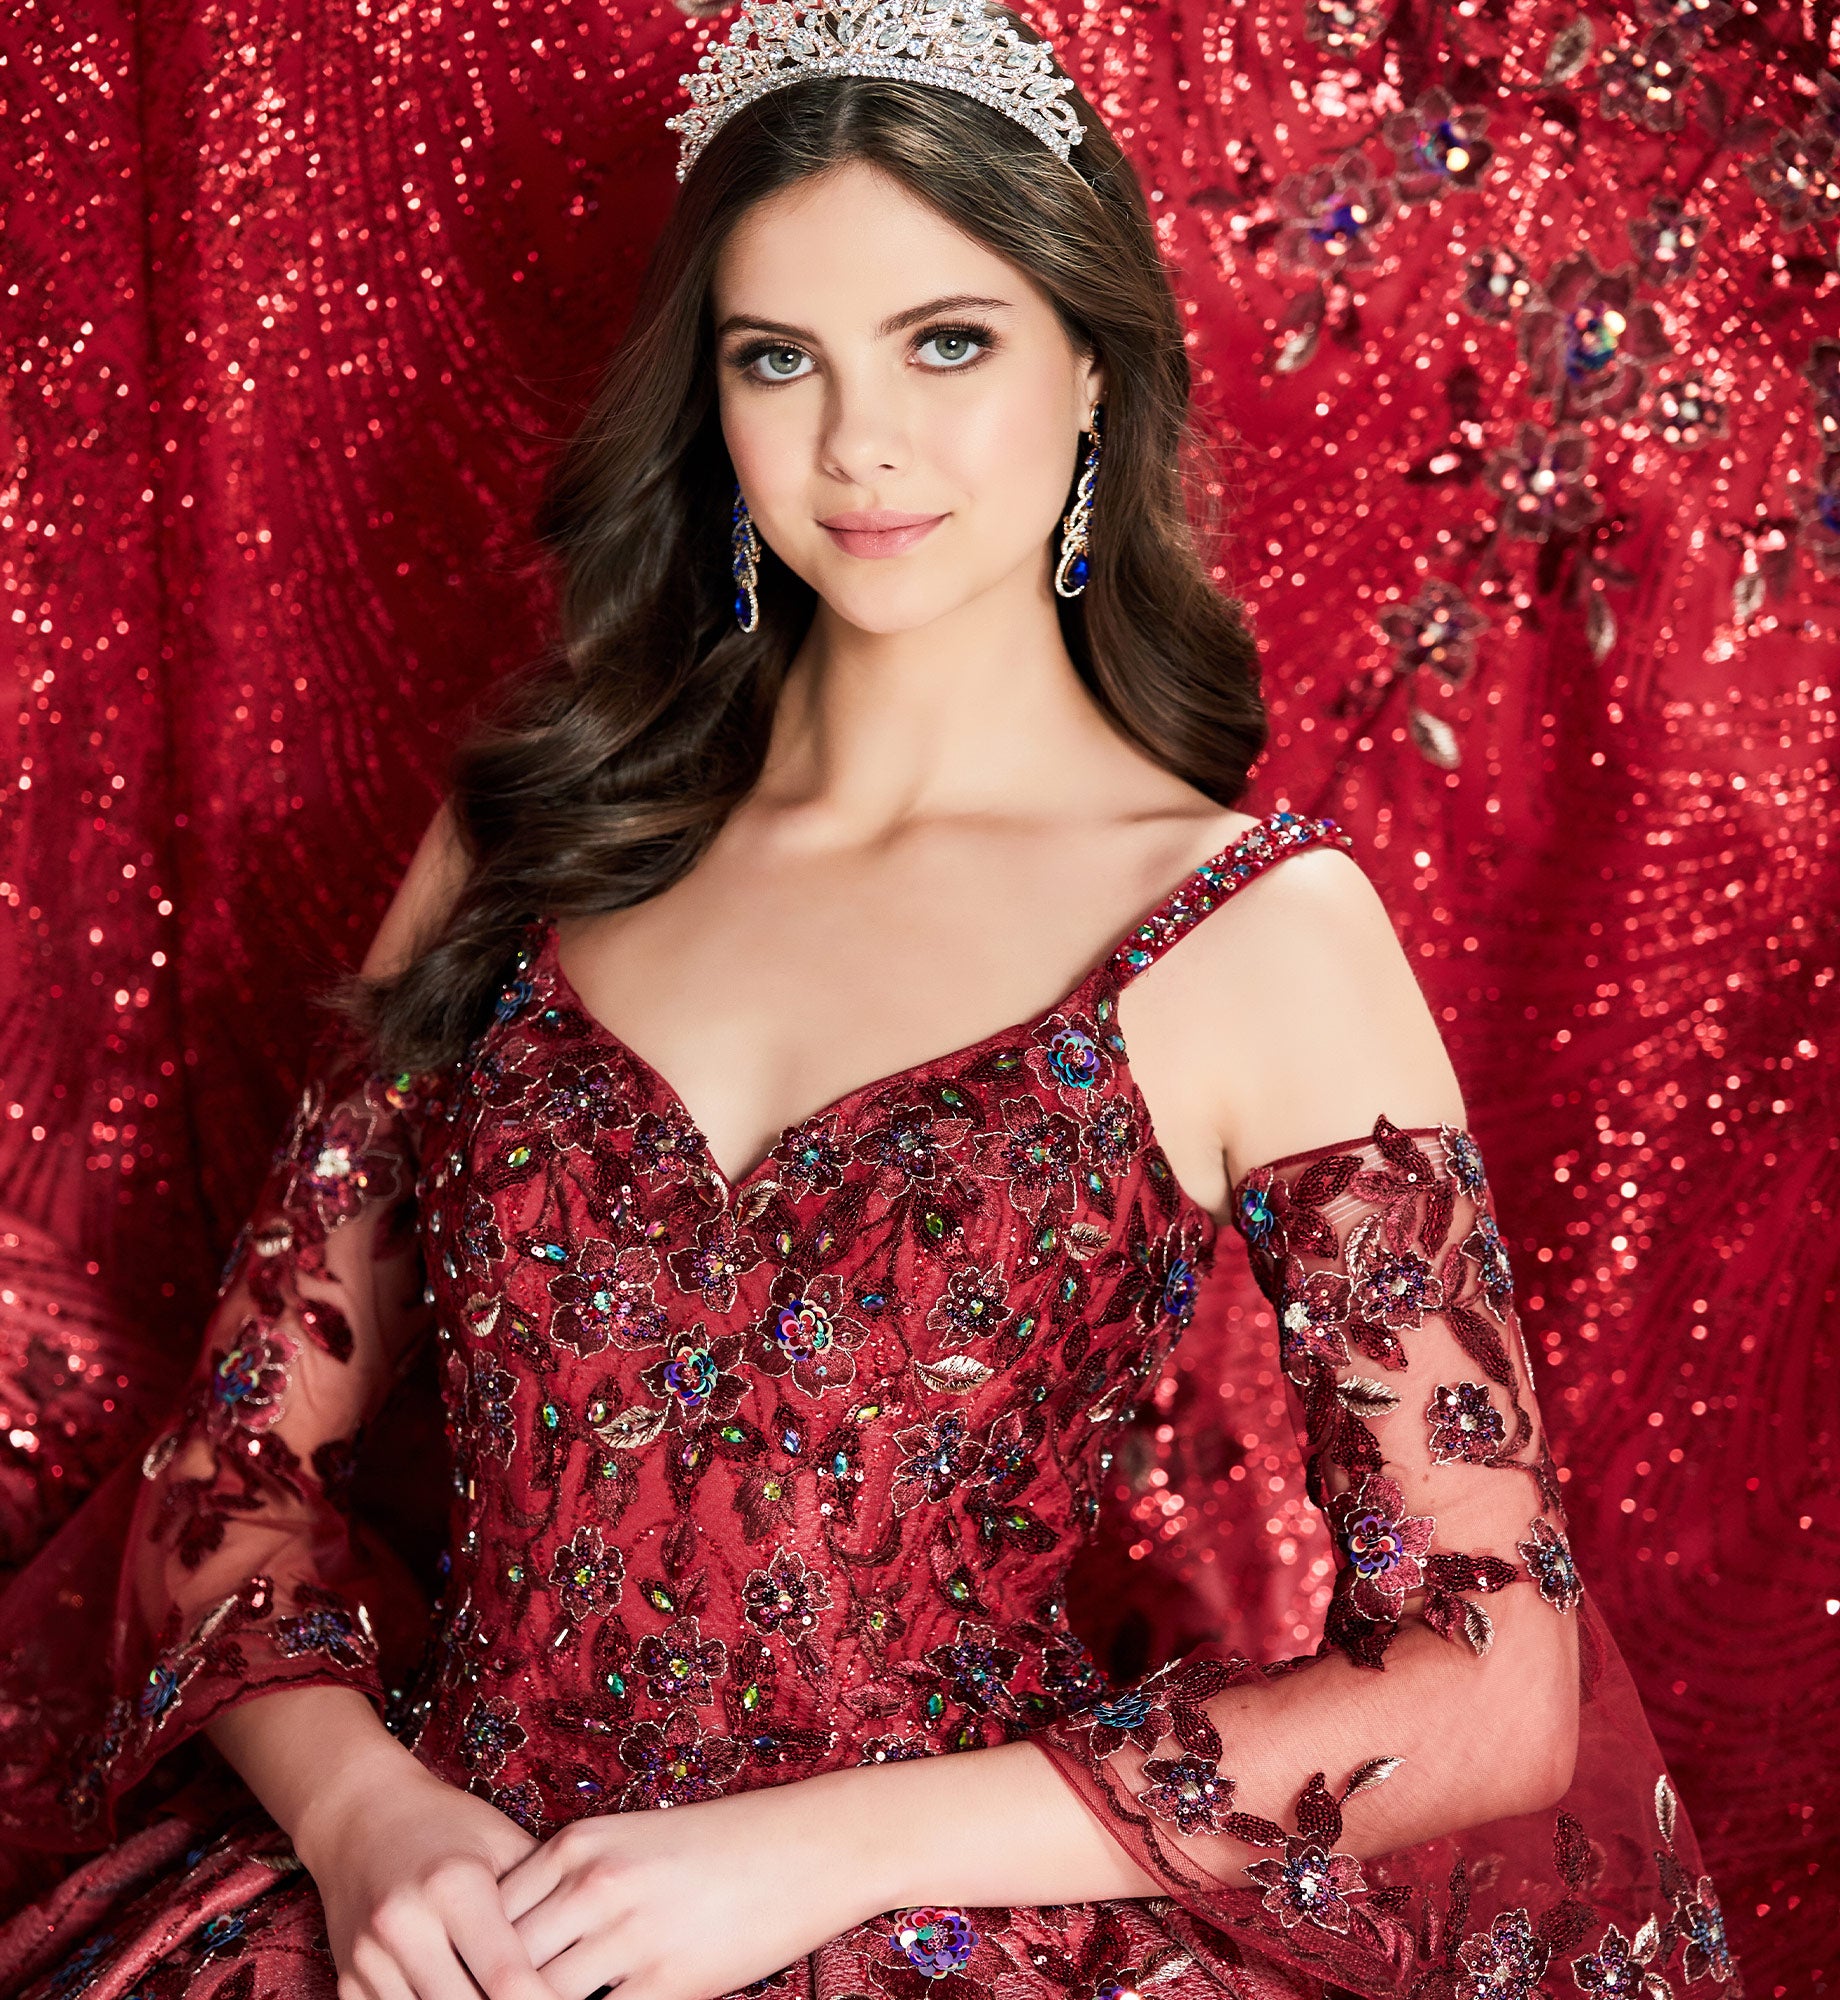 Bold quinceanera dress with dazzling stone and sequin accents